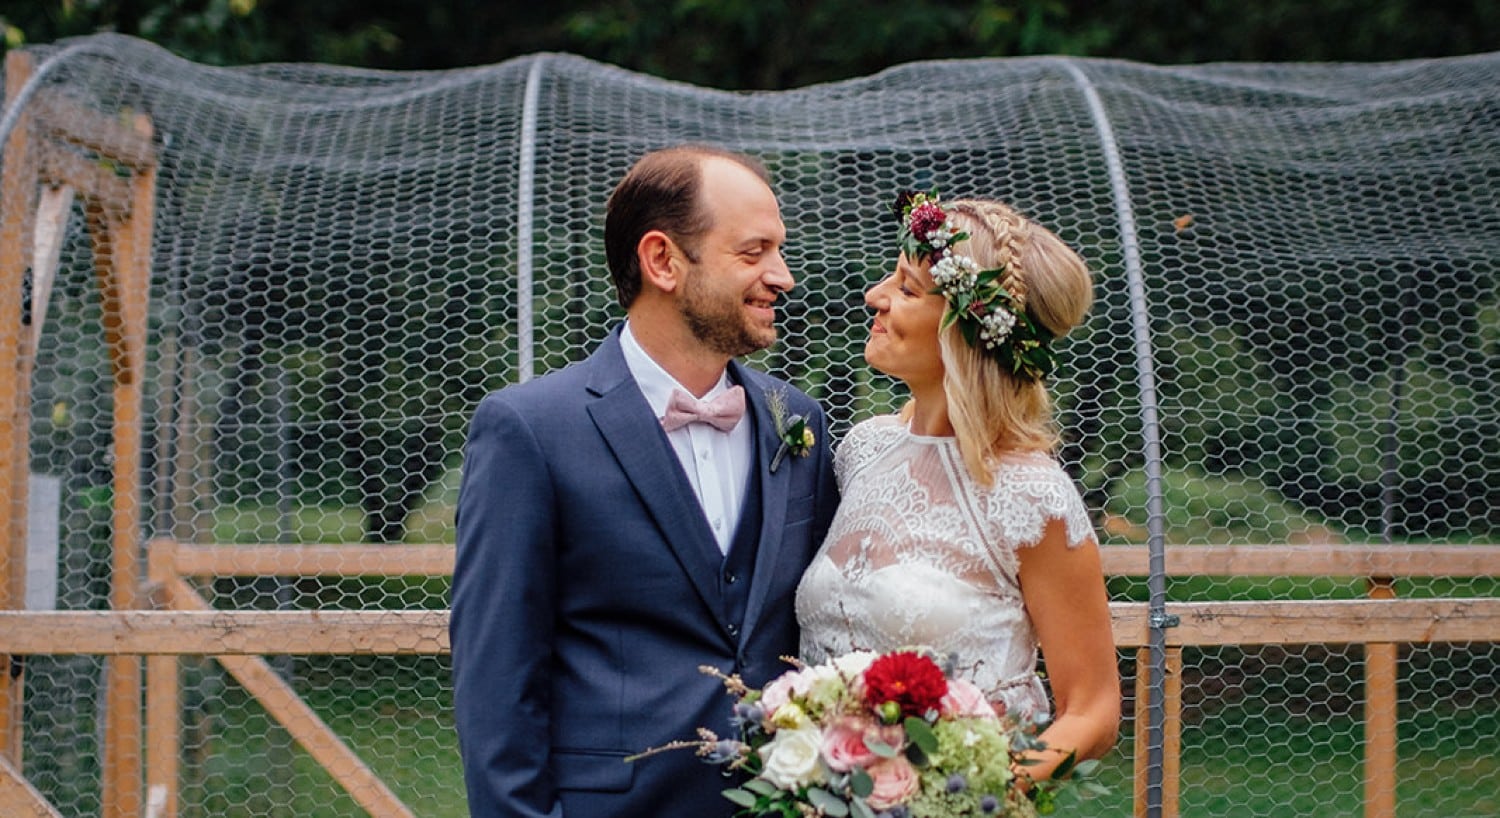 A bride with a gorgeous bouquet and floral headpiece with her groom standing outdoors